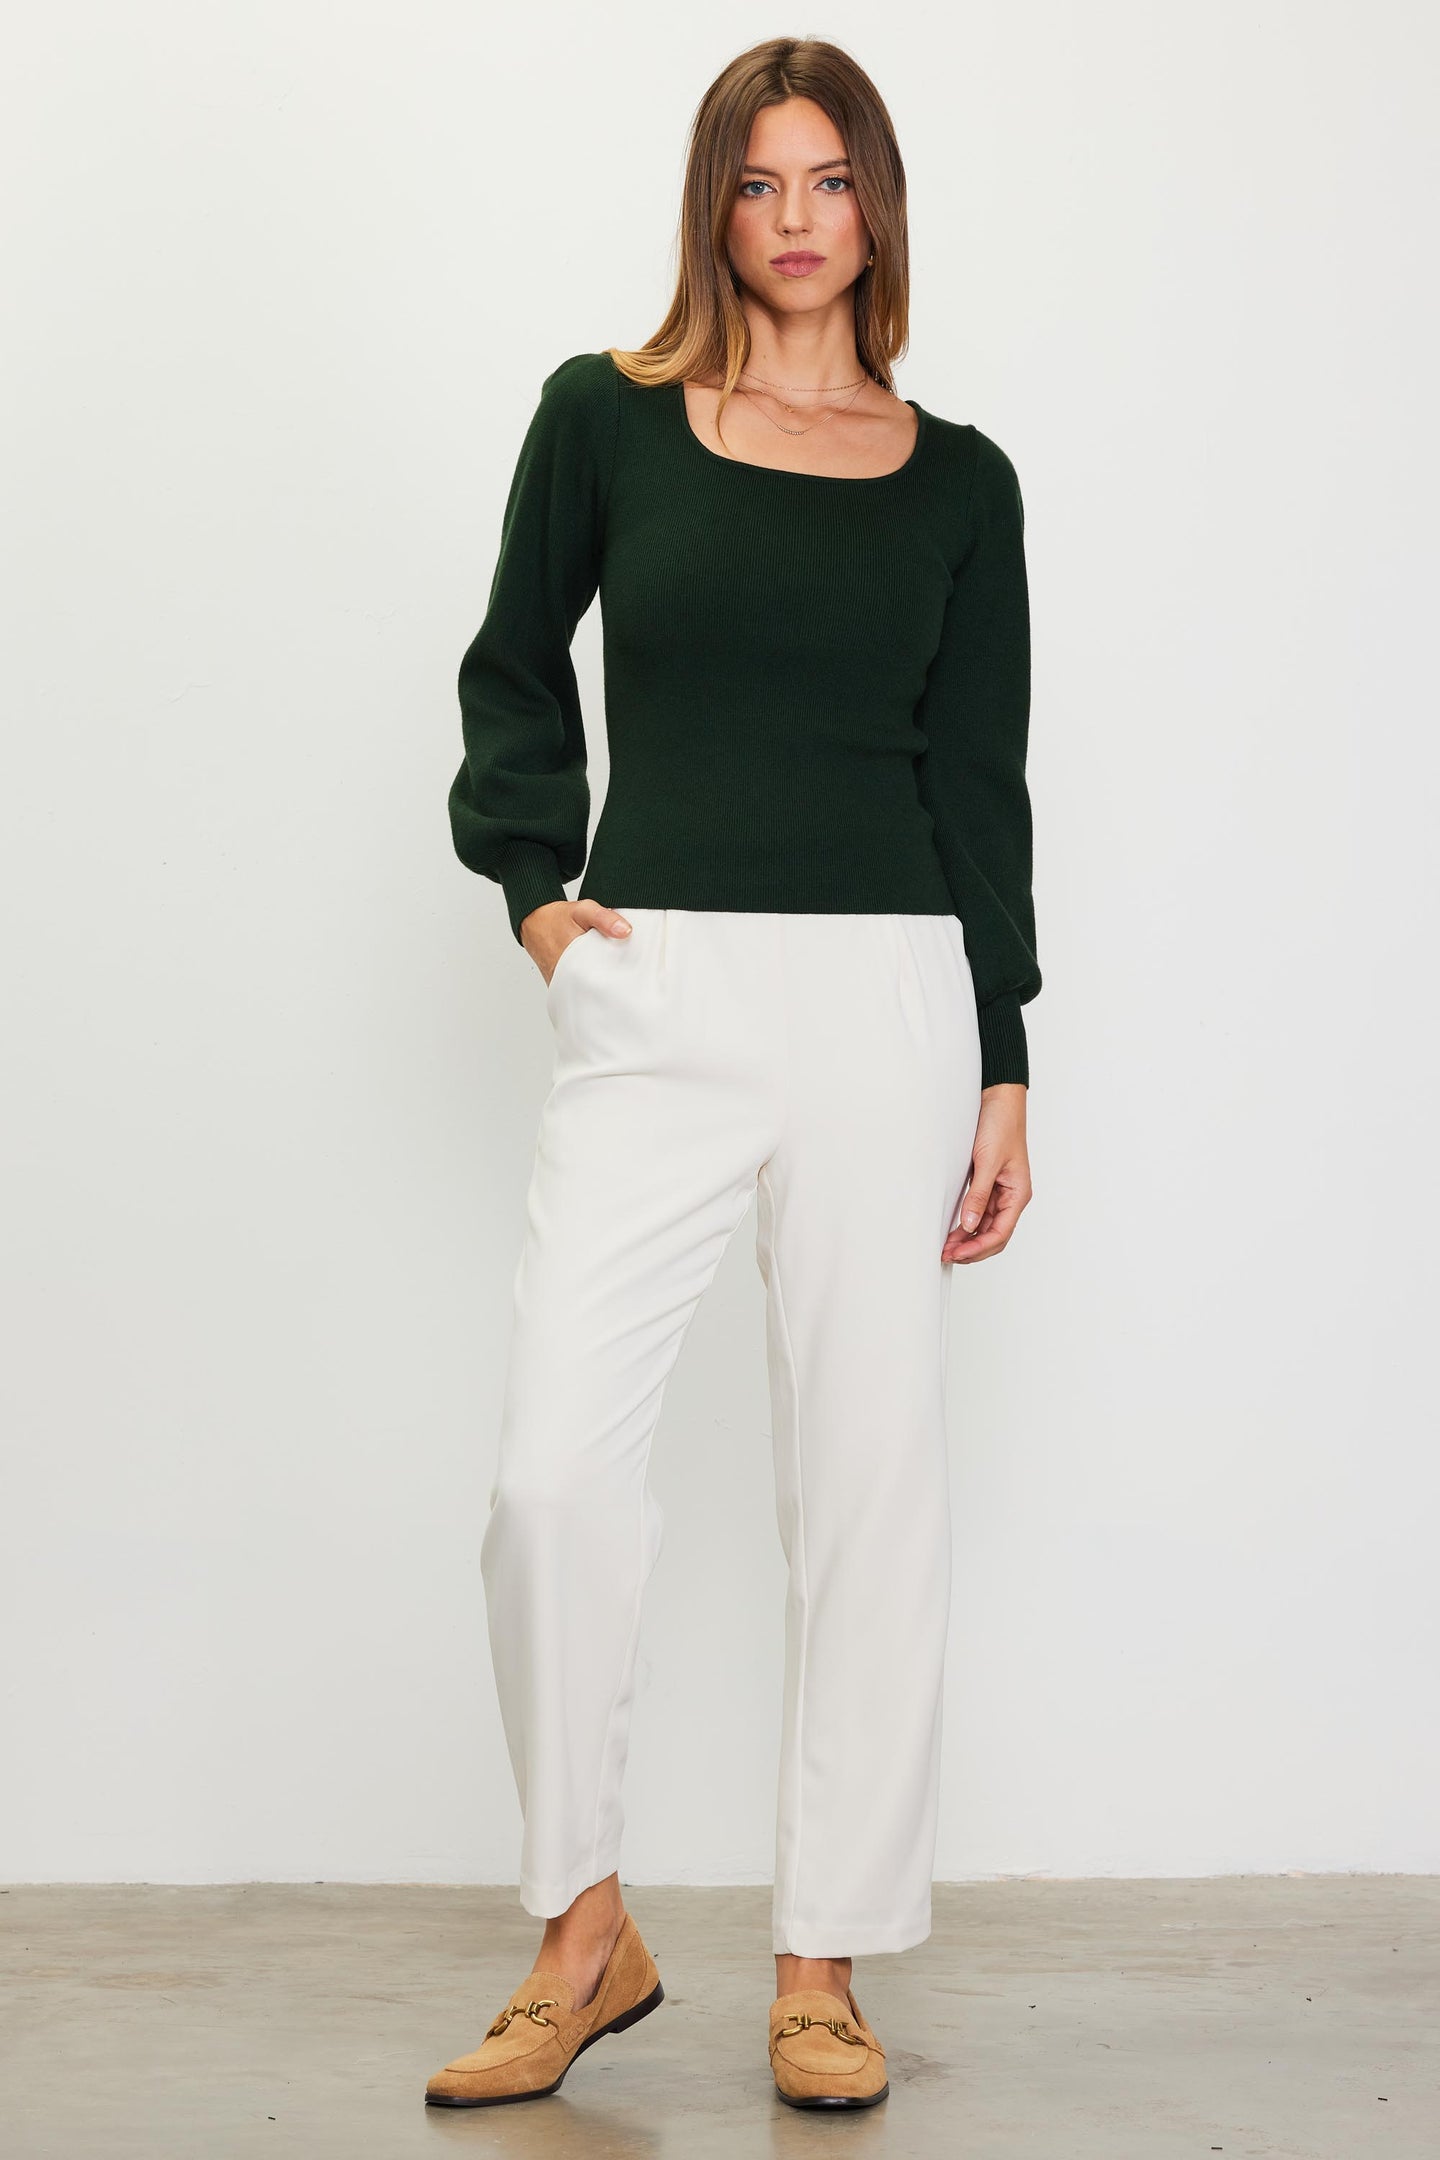 Longsleeve Square Neck Sweater Top